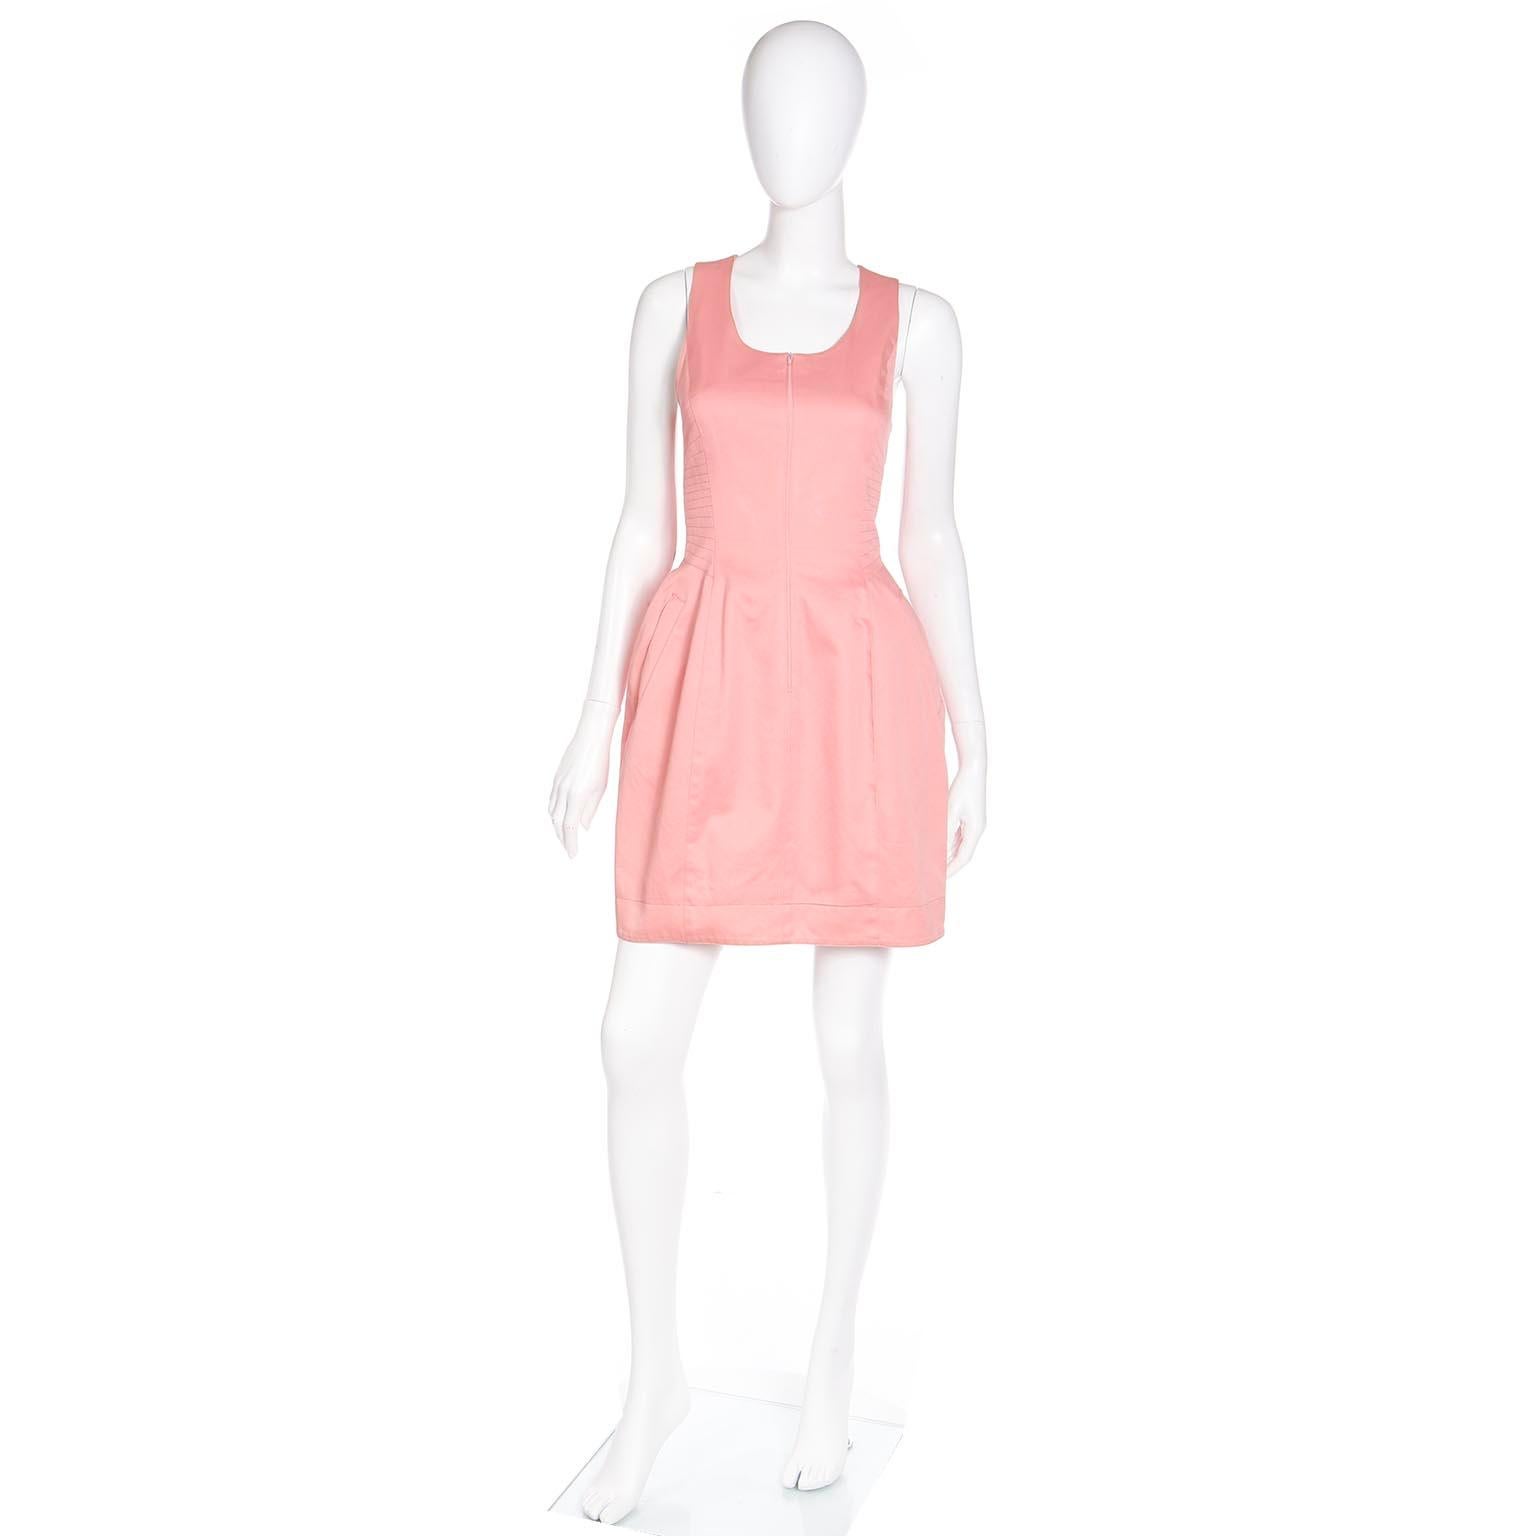 This vintage 1980's Claude Montana peachy pink cotton sleeveless mini dress has so many subtle details that make it so flattering! Claude Montana was a contemporary (and one time roomate) of Thierry Mugler. Both Mugler and Montana helped to define